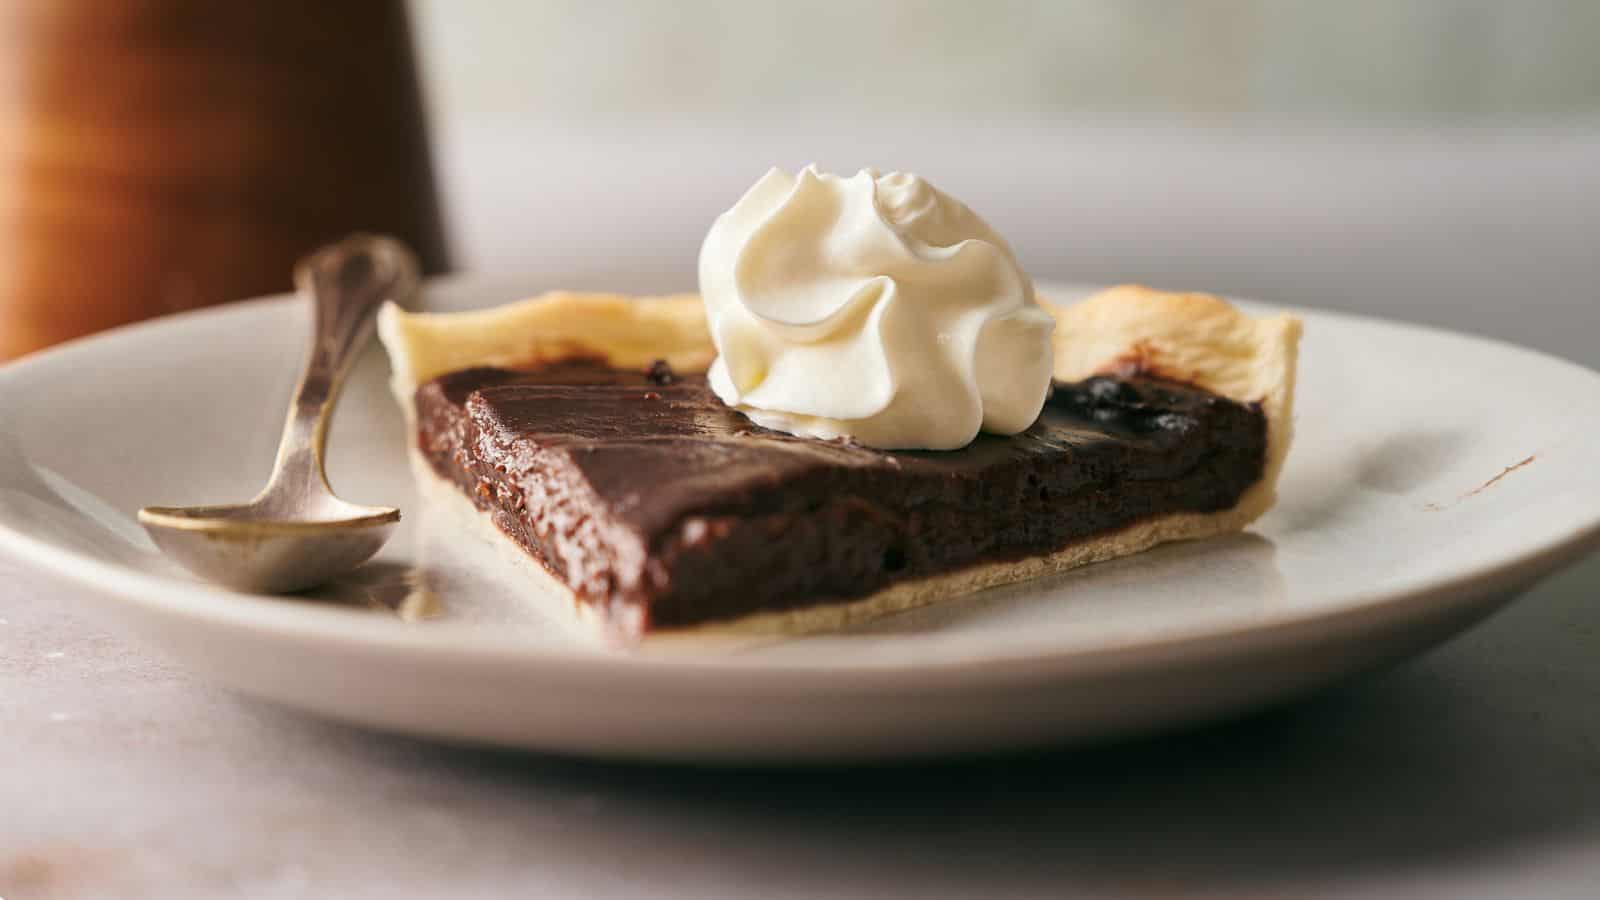 <p>Who doesn’t love chocolate? This pie offers a rich, velvety experience that’ll be requested time and time again. An all-time family favorite.<br><strong>Get the Recipe: </strong><a href="https://www.splashoftaste.com/chocolate-pie/?utm_source=msn&utm_medium=page&utm_campaign=msn">Chocolate Pie</a></p>